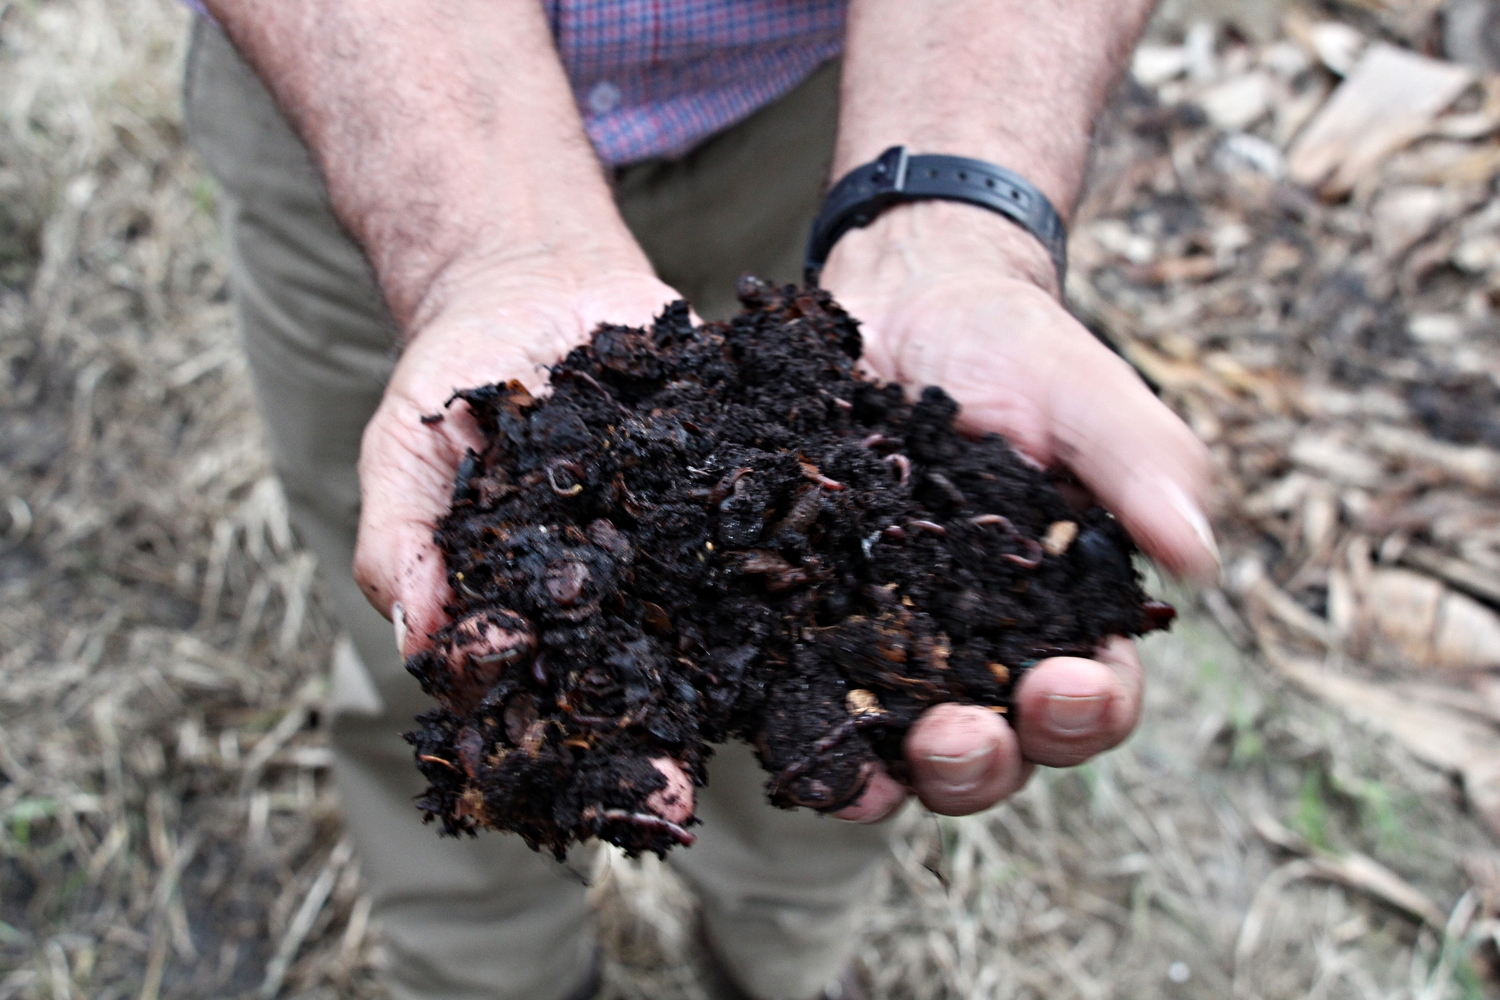 When ready, the fertile compost is spread throughout the finca